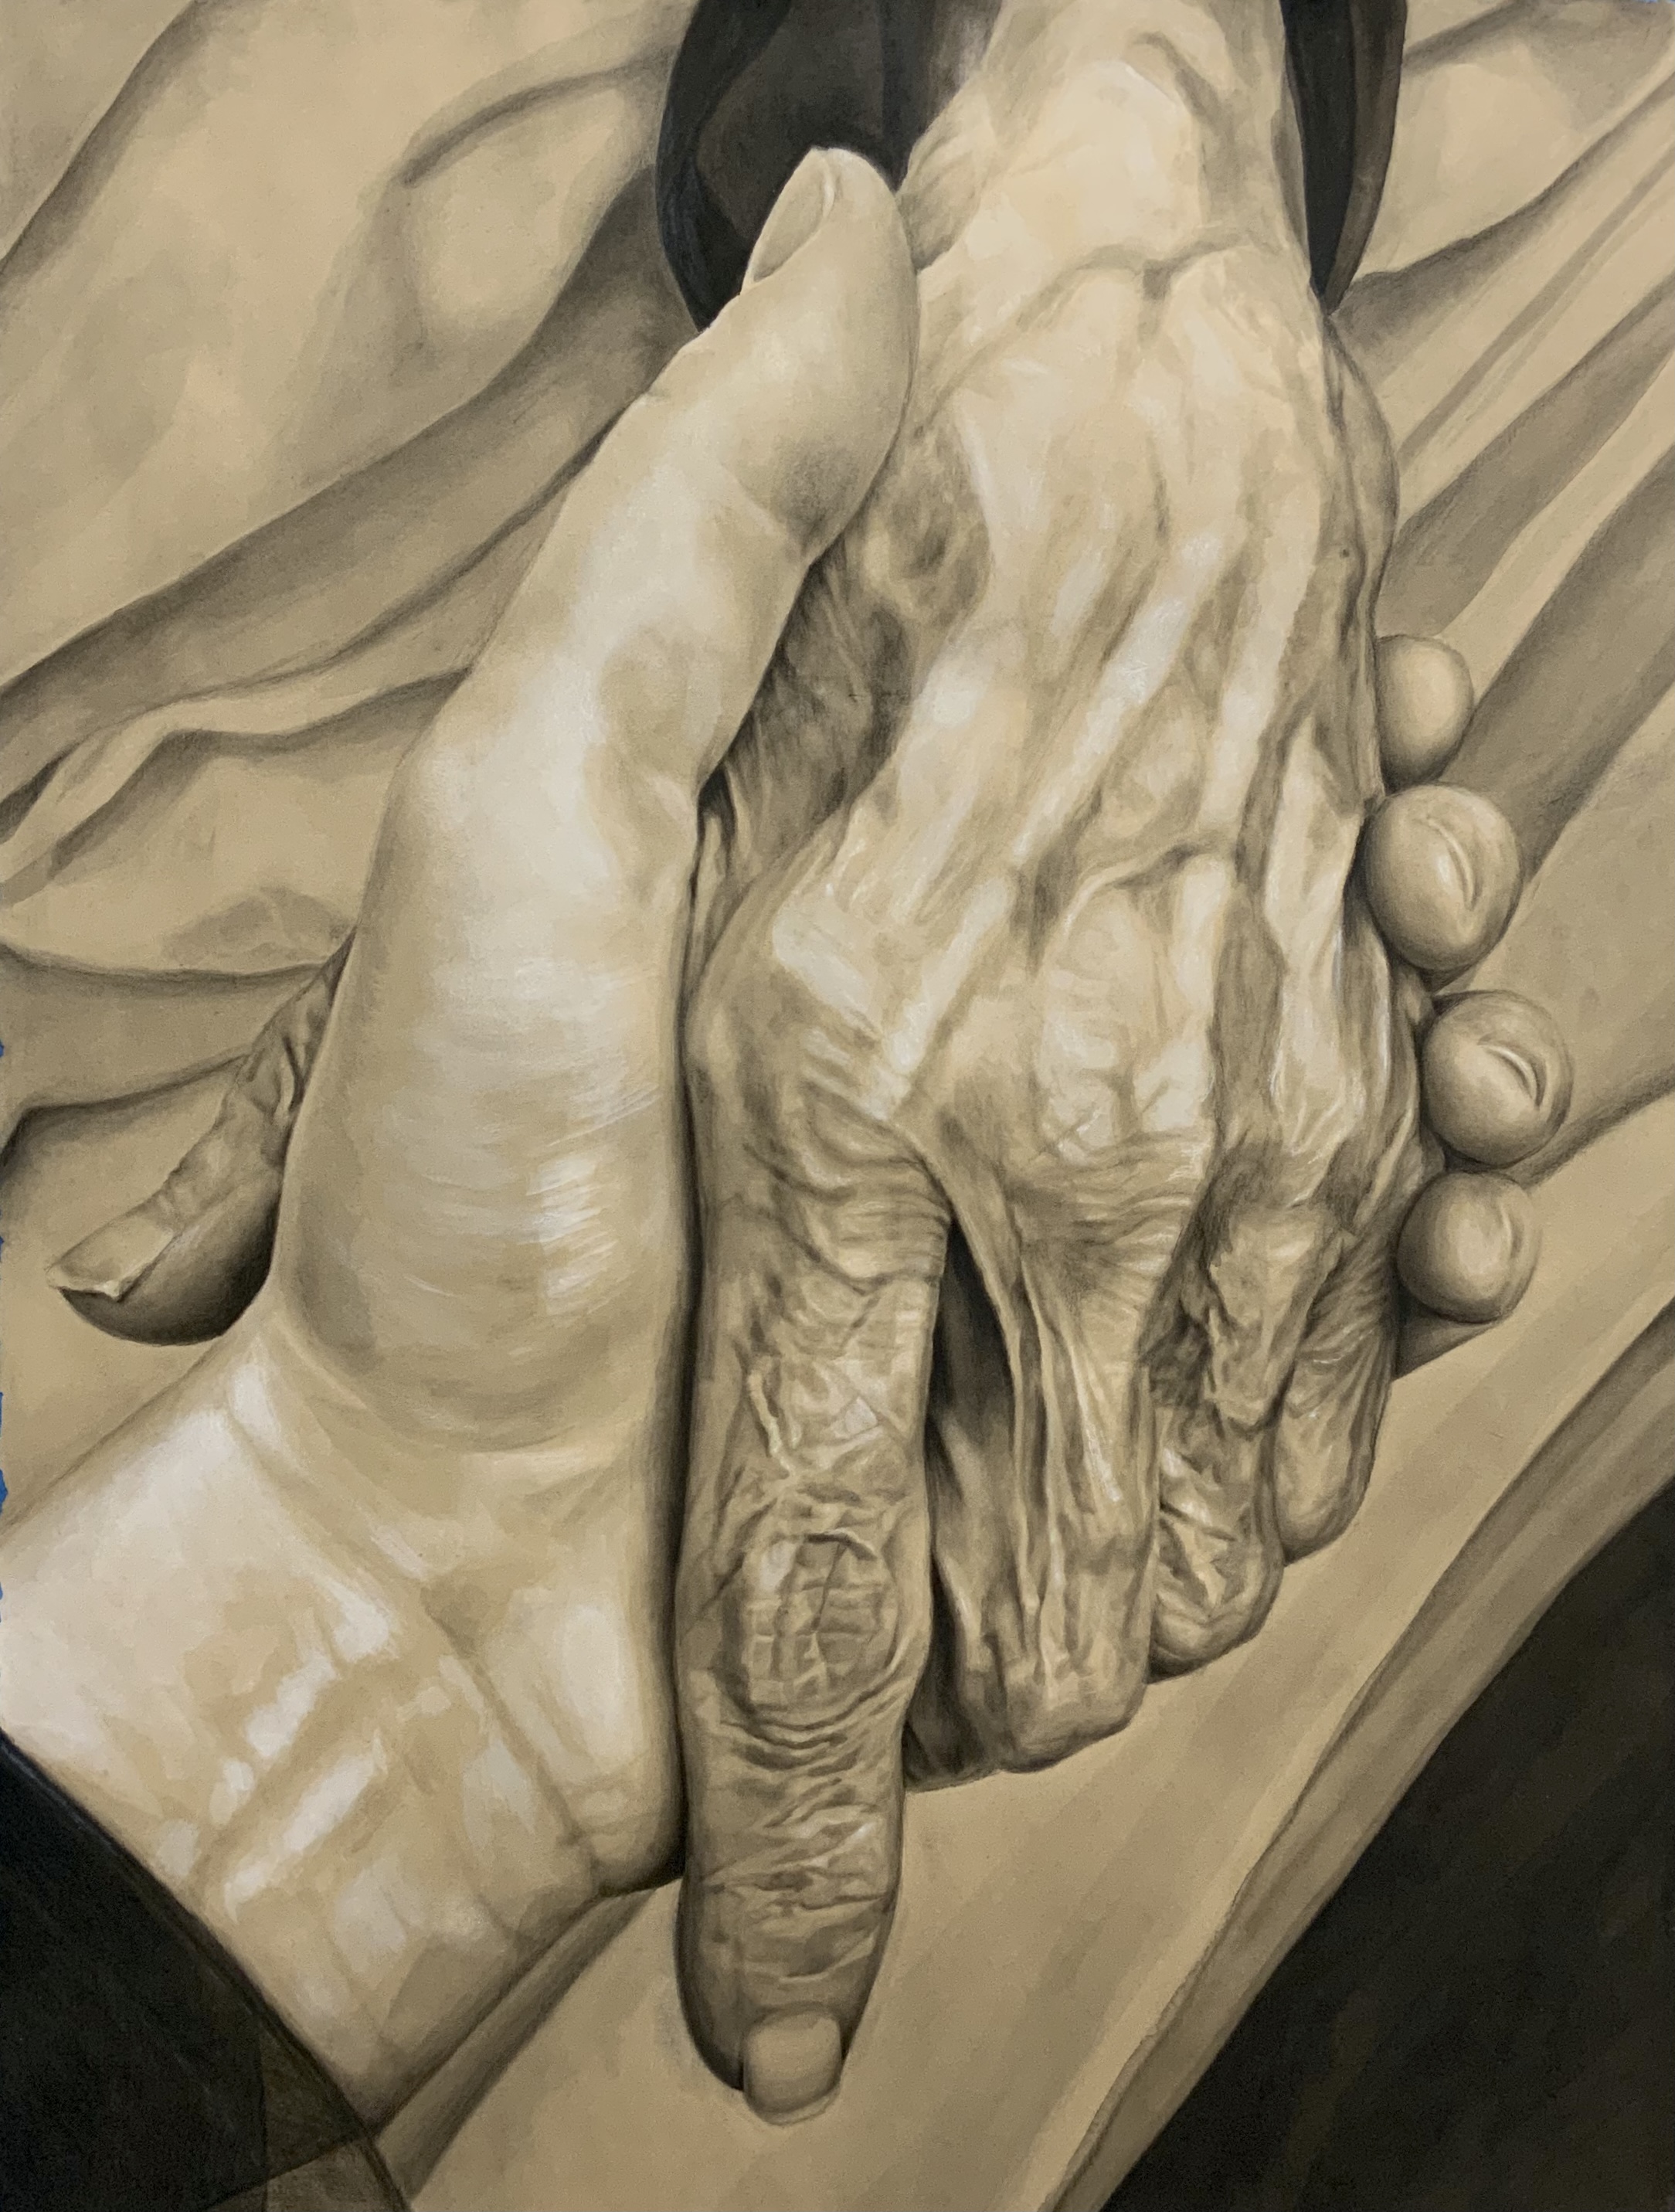 A drawing of myself and my grandmother holding hands during her final days. “Yaya,” is the Greek term for grandmother.